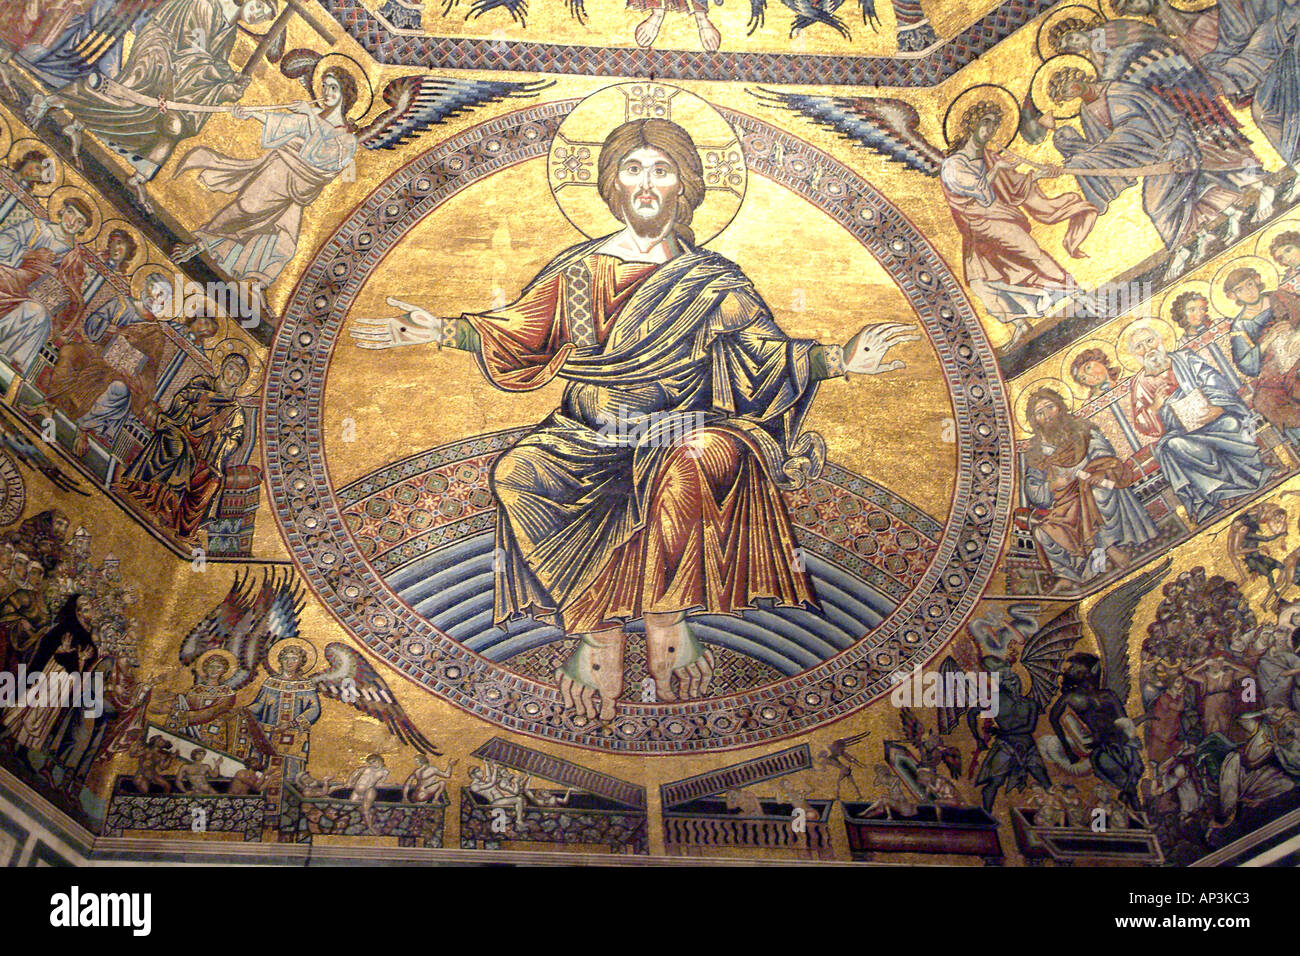 Florence Italy Europe The Baptistry ceiling 13th century mosiacs illustrate the Last Judgement Stock Photo